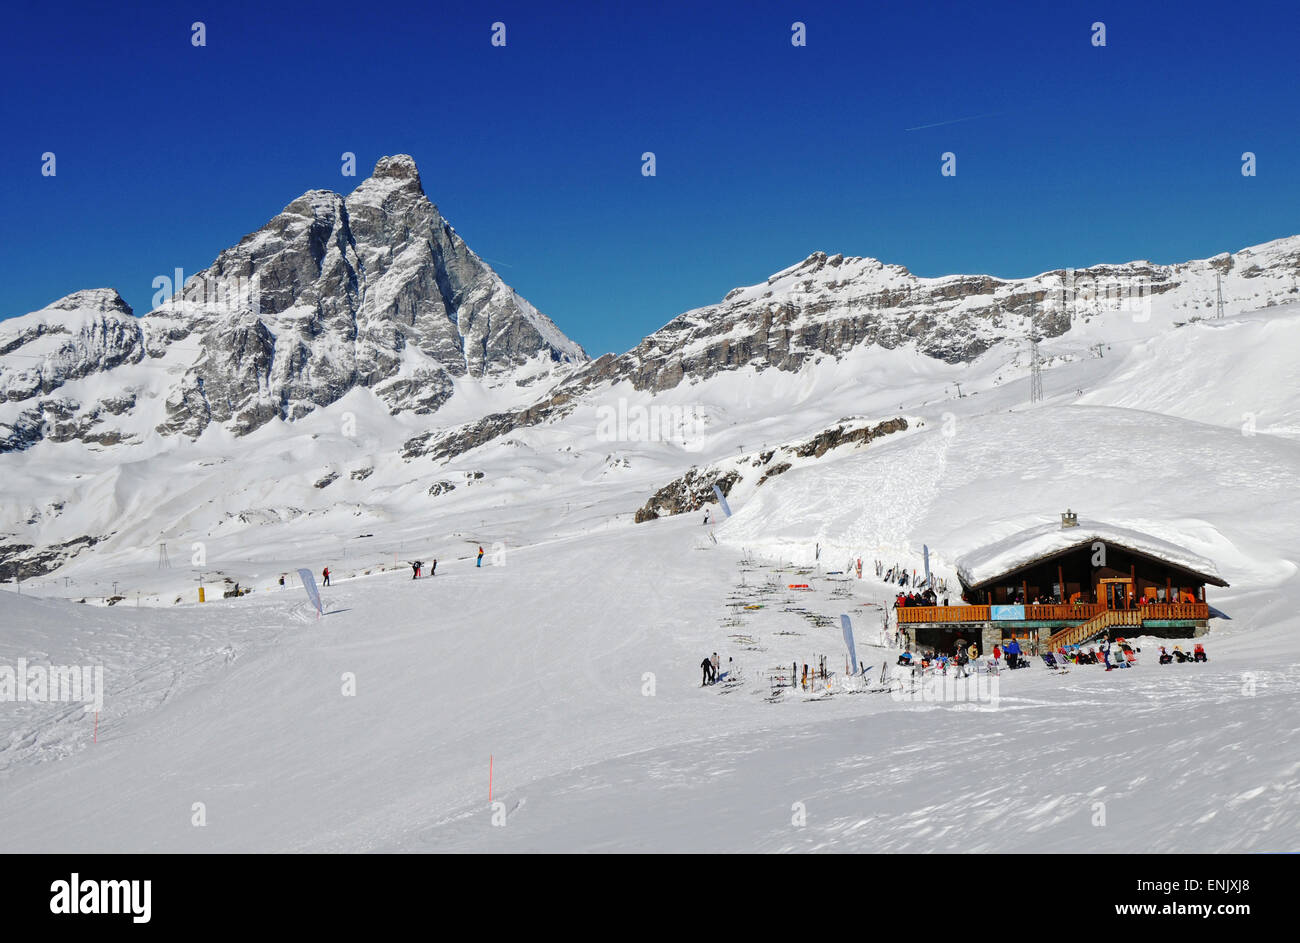 Italy, Aosta Valley, Cervinia, chalet and Matterhorn in background Stock Photo